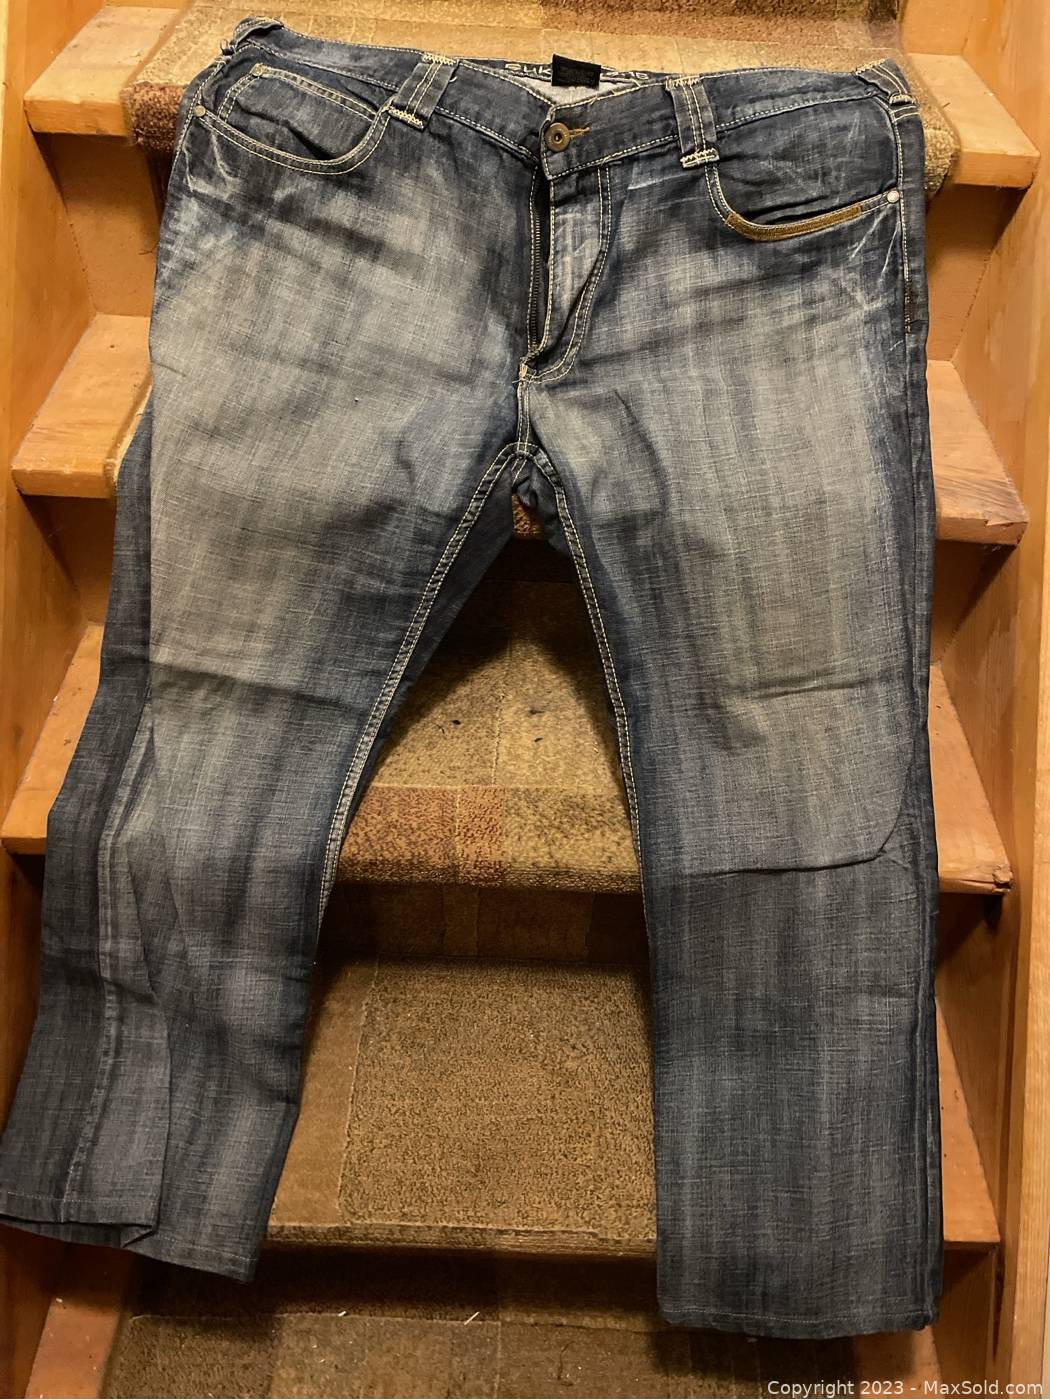 A pair of SUKO jeans in a size 10